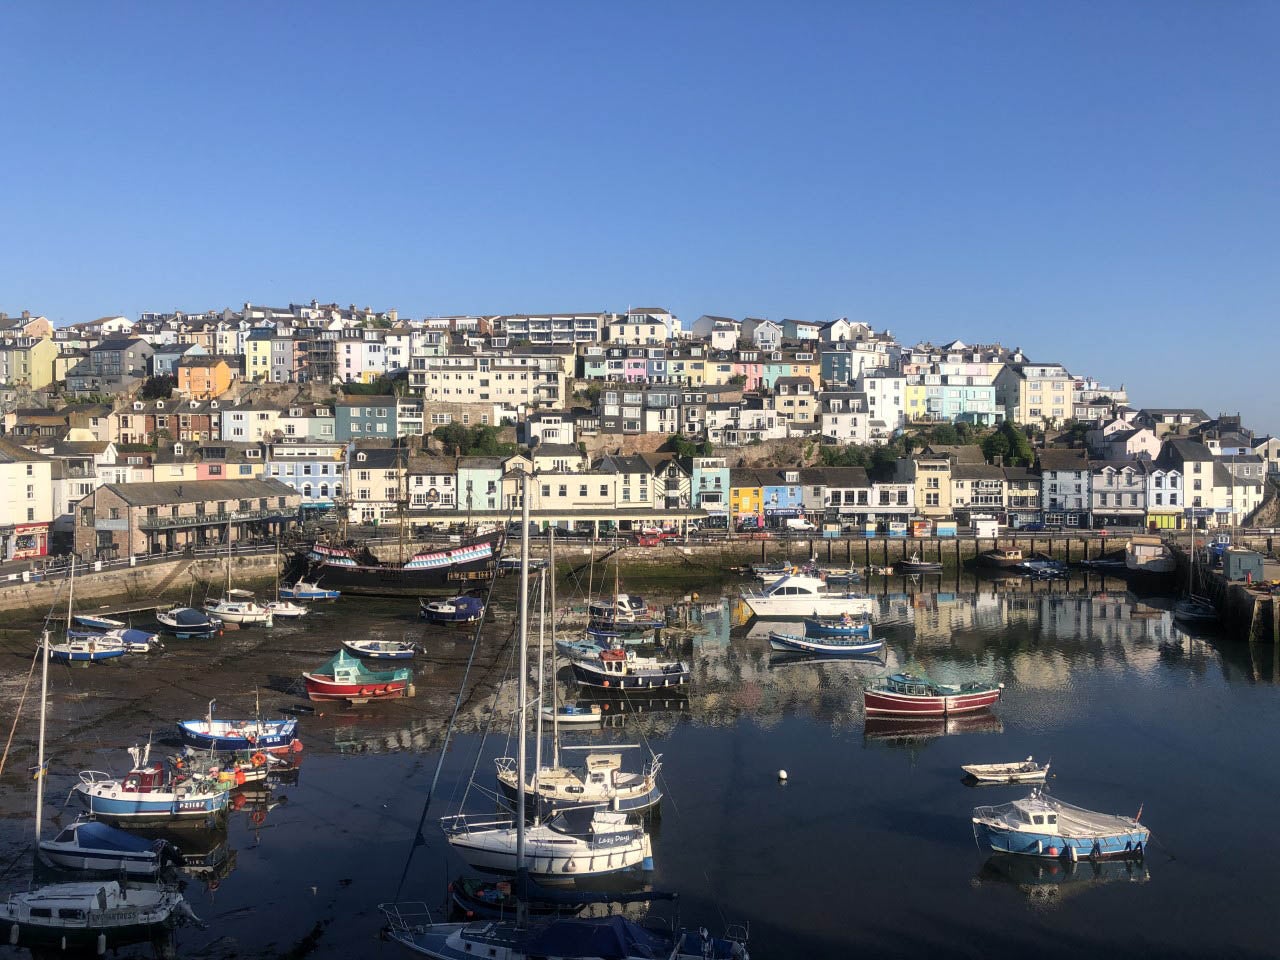 Brixham fish market landed a whopping £43.6m worth of seafood last year